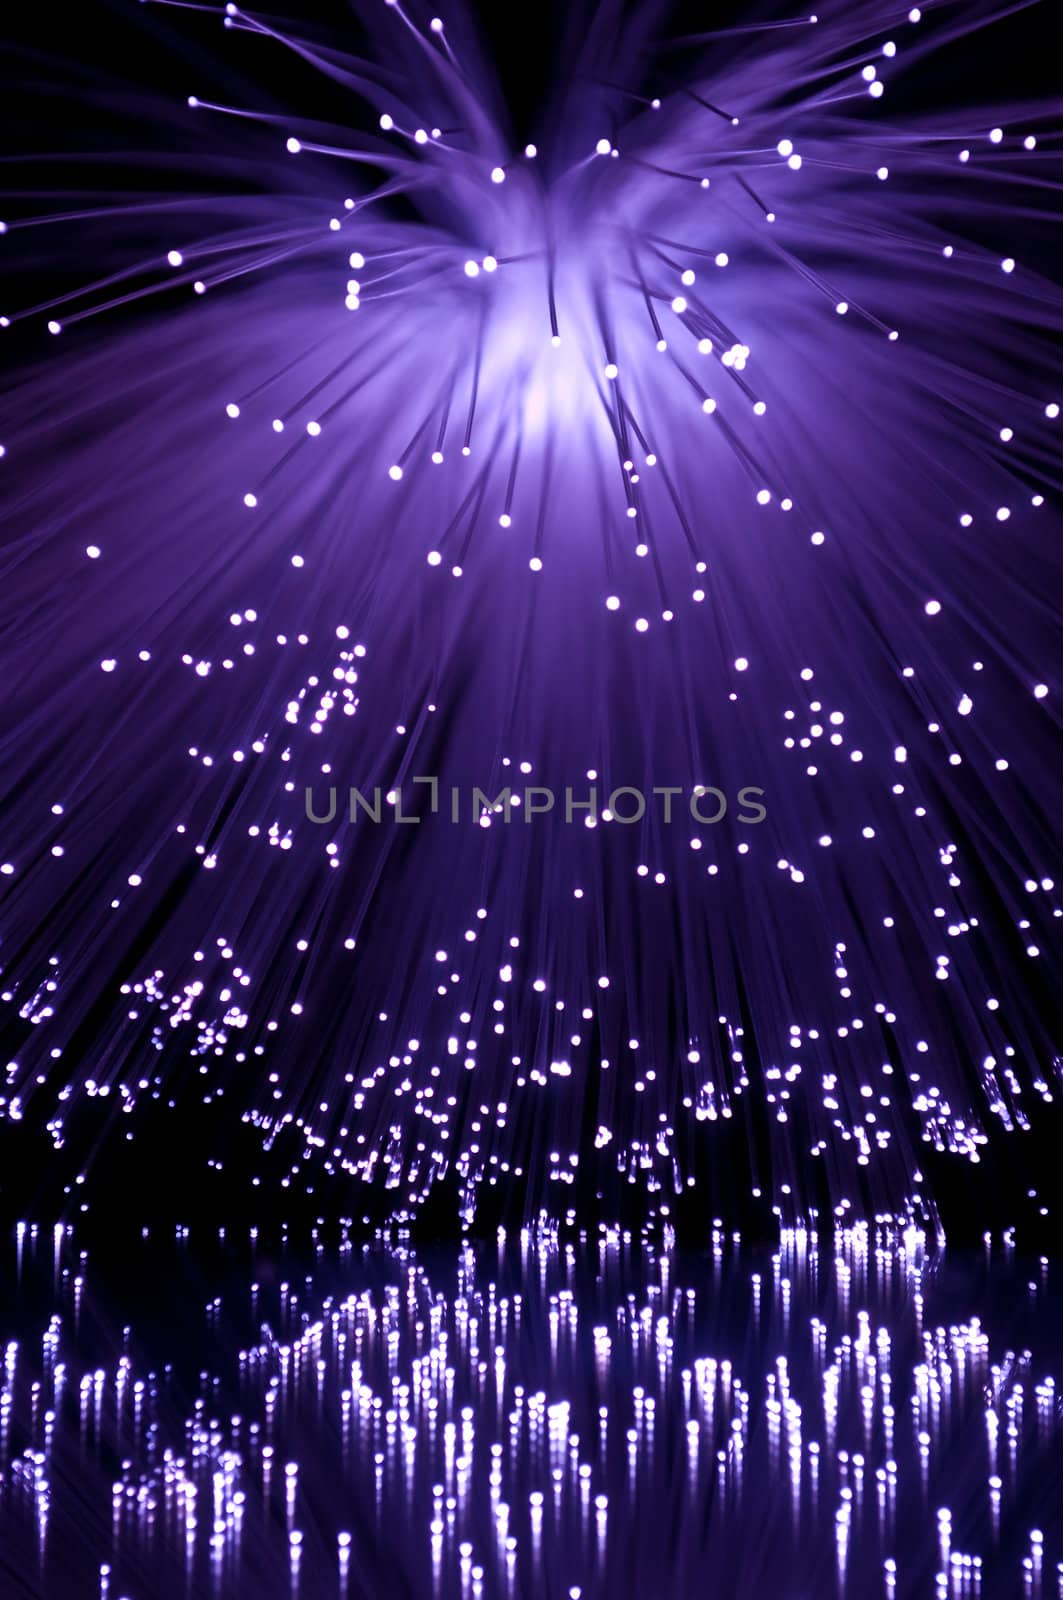 Purple fibre optic light strands cascading down against black background and reflecting into the foreground.